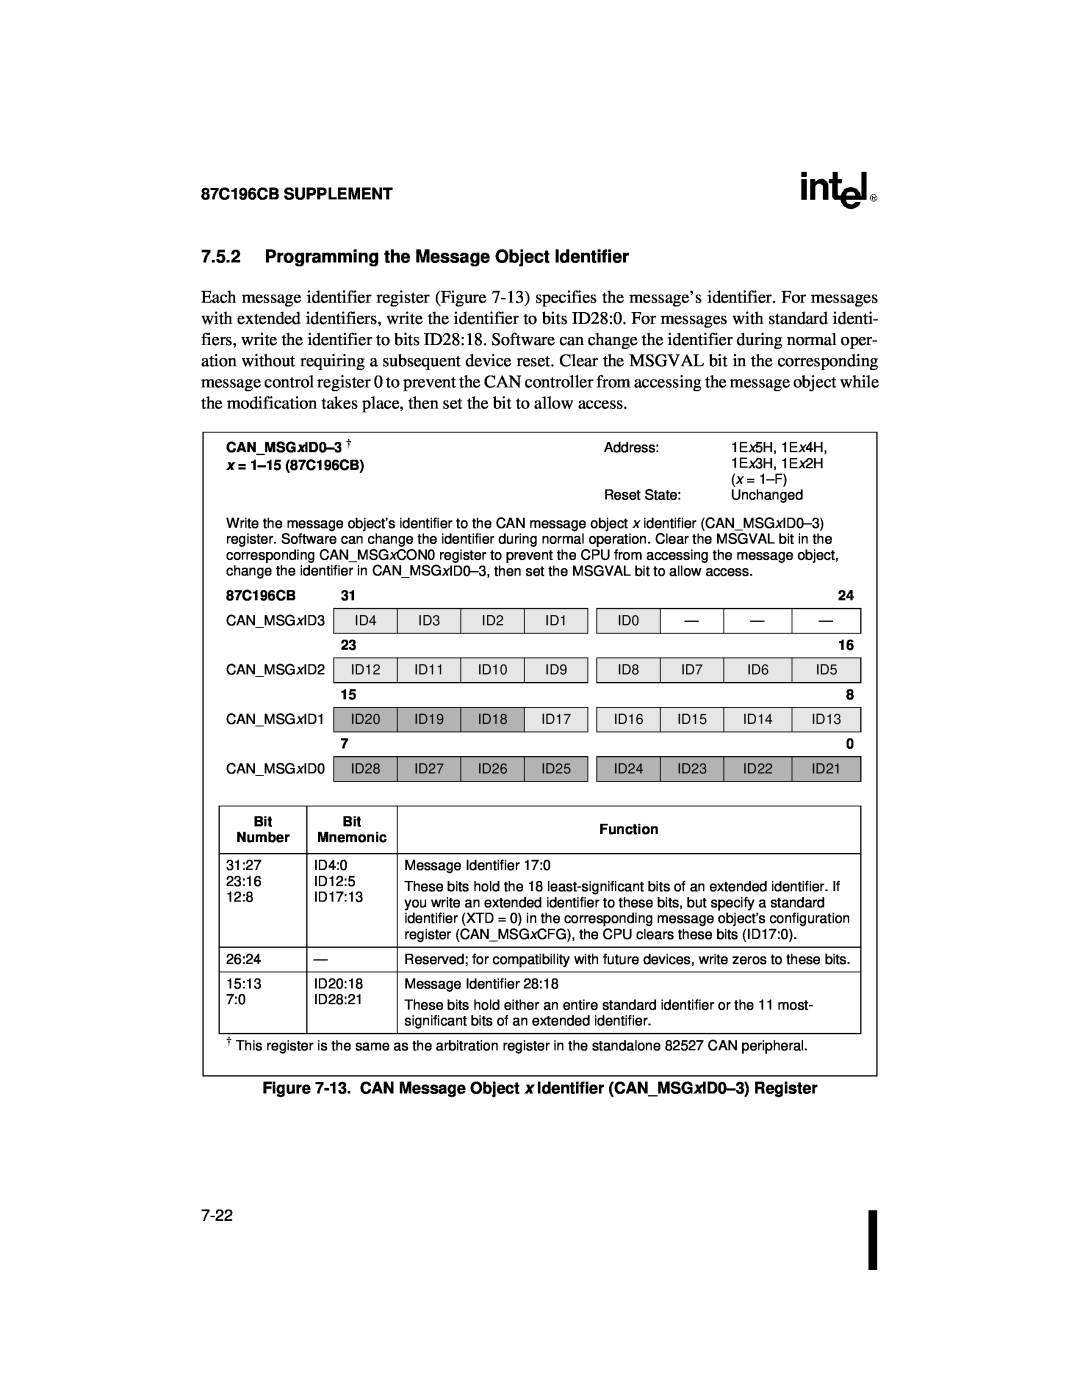 Intel 8XC196NT user manual Programming the Message Object Identifier, 87C196CB SUPPLEMENT 